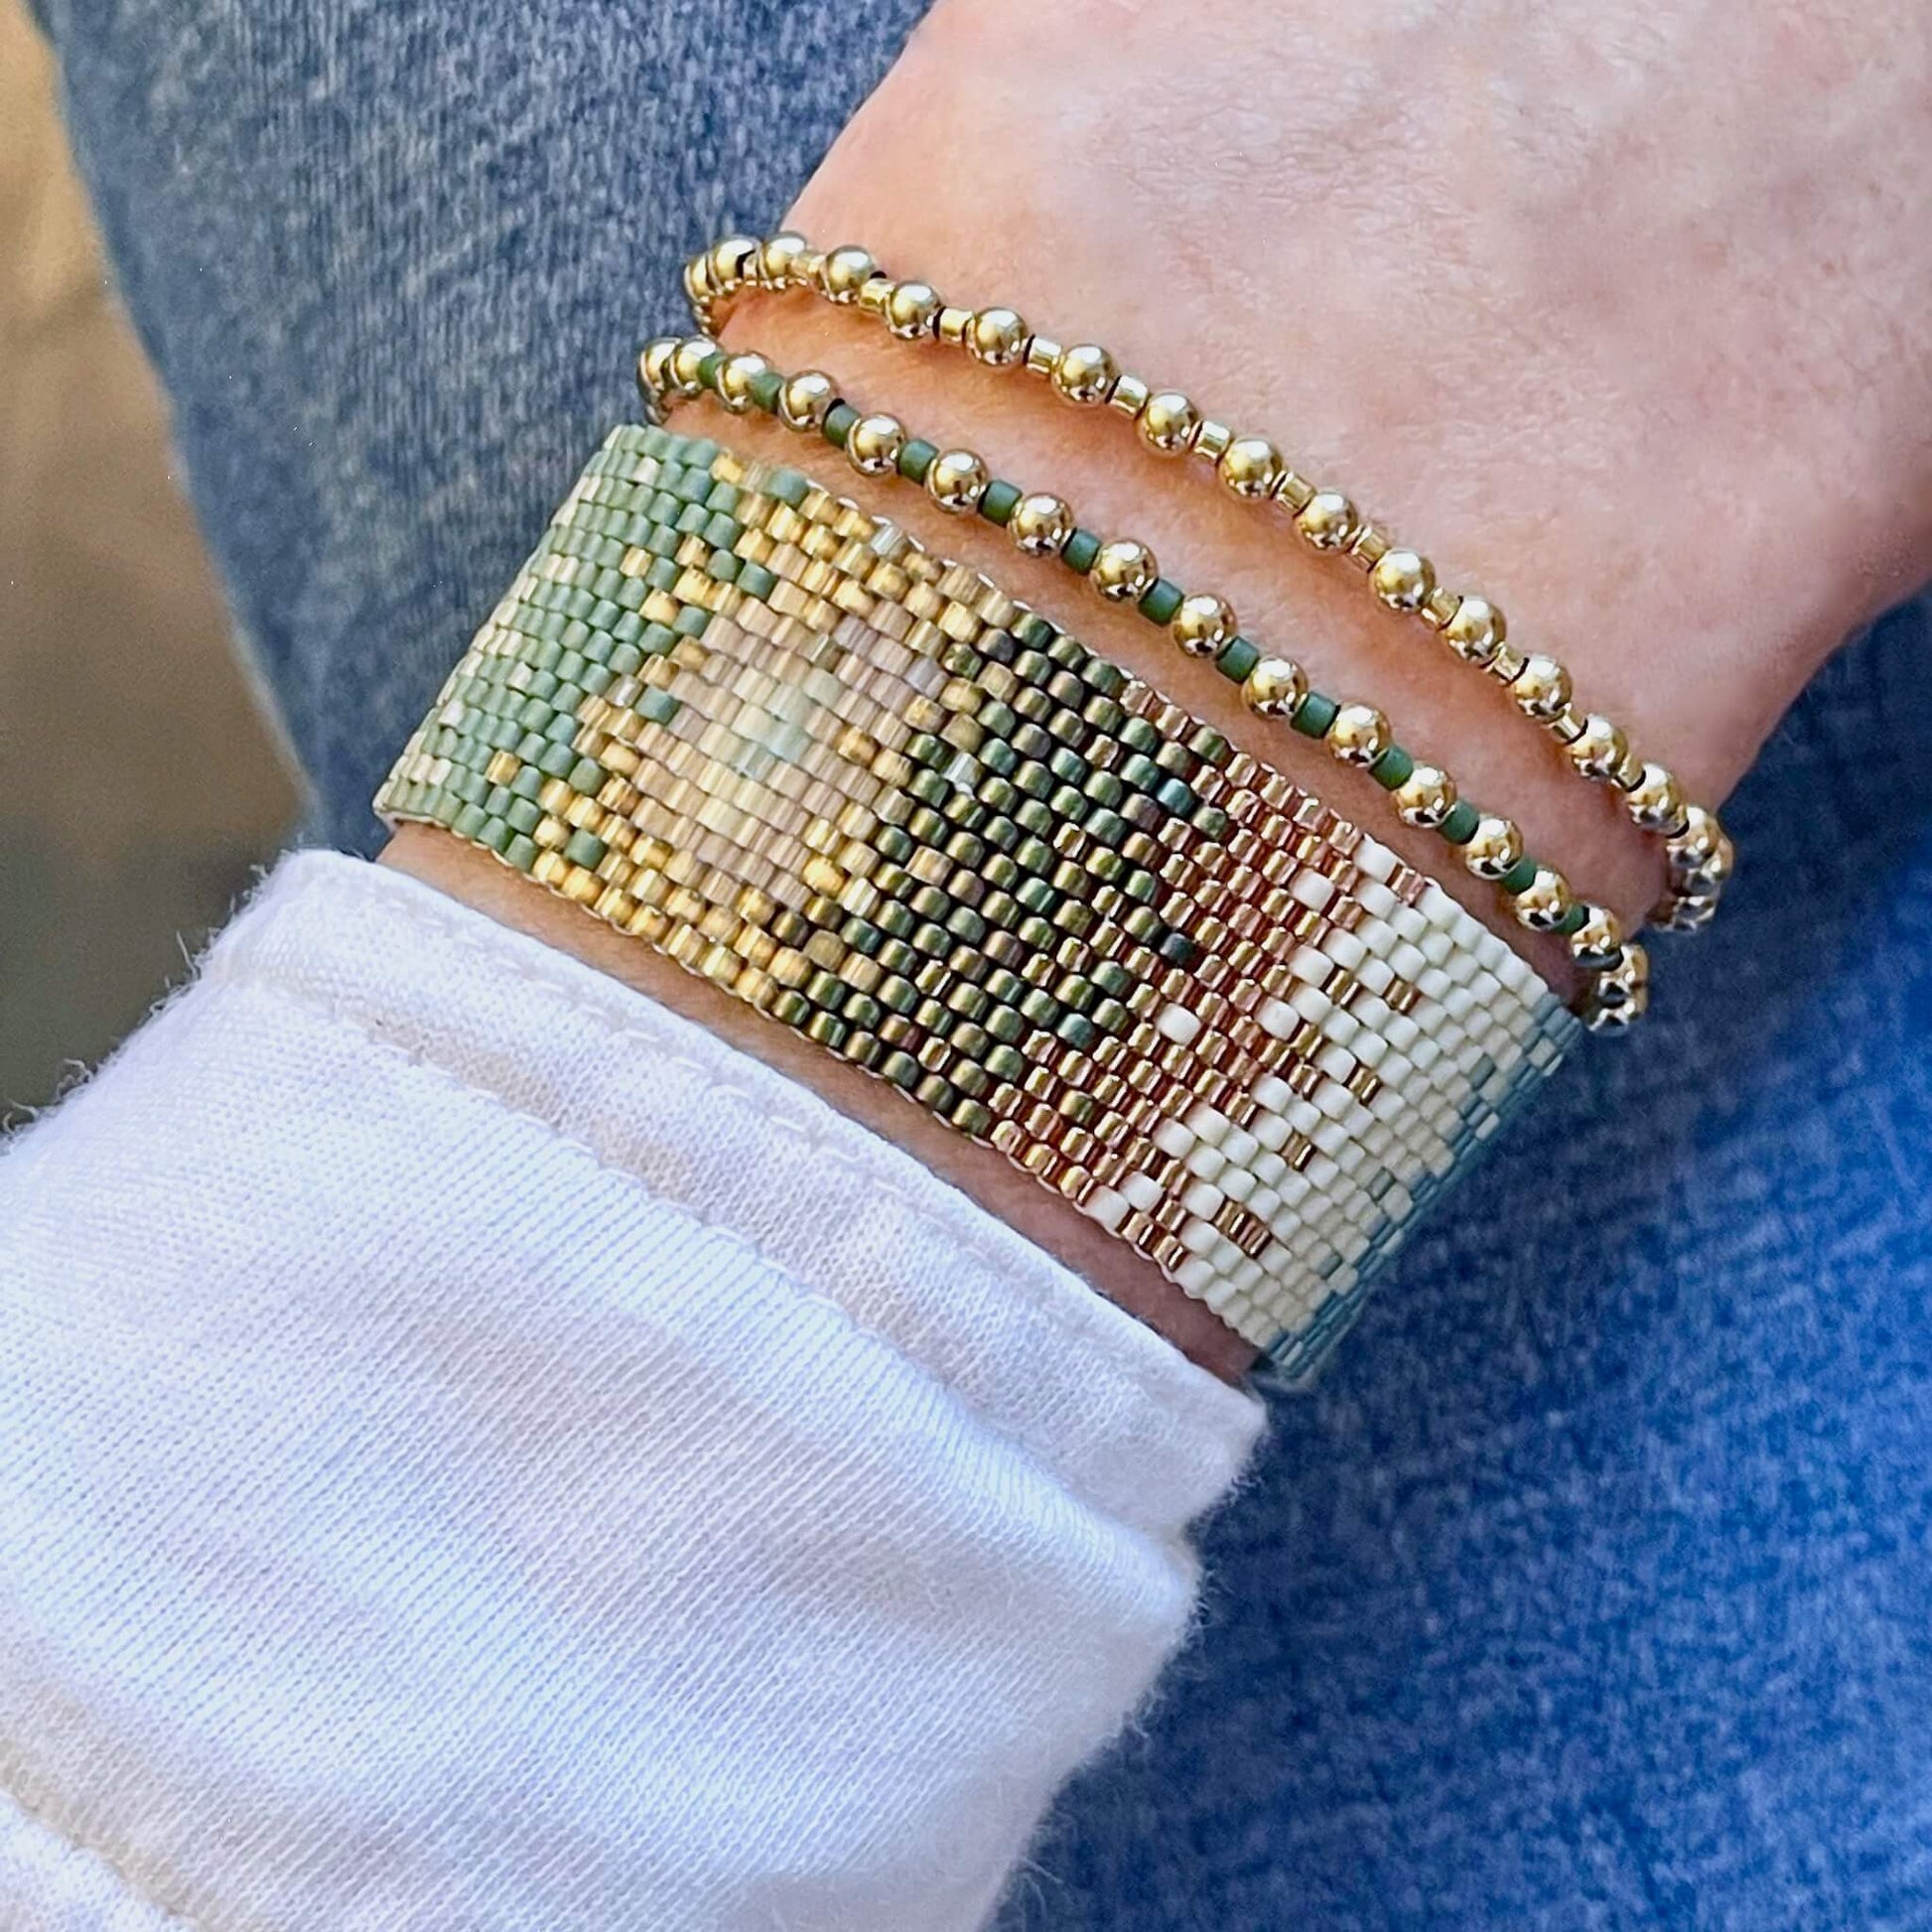 Modern boho ombre green and gold hand beaded peyote bracelet and gold and seed bead delicate stretch bracelet set.